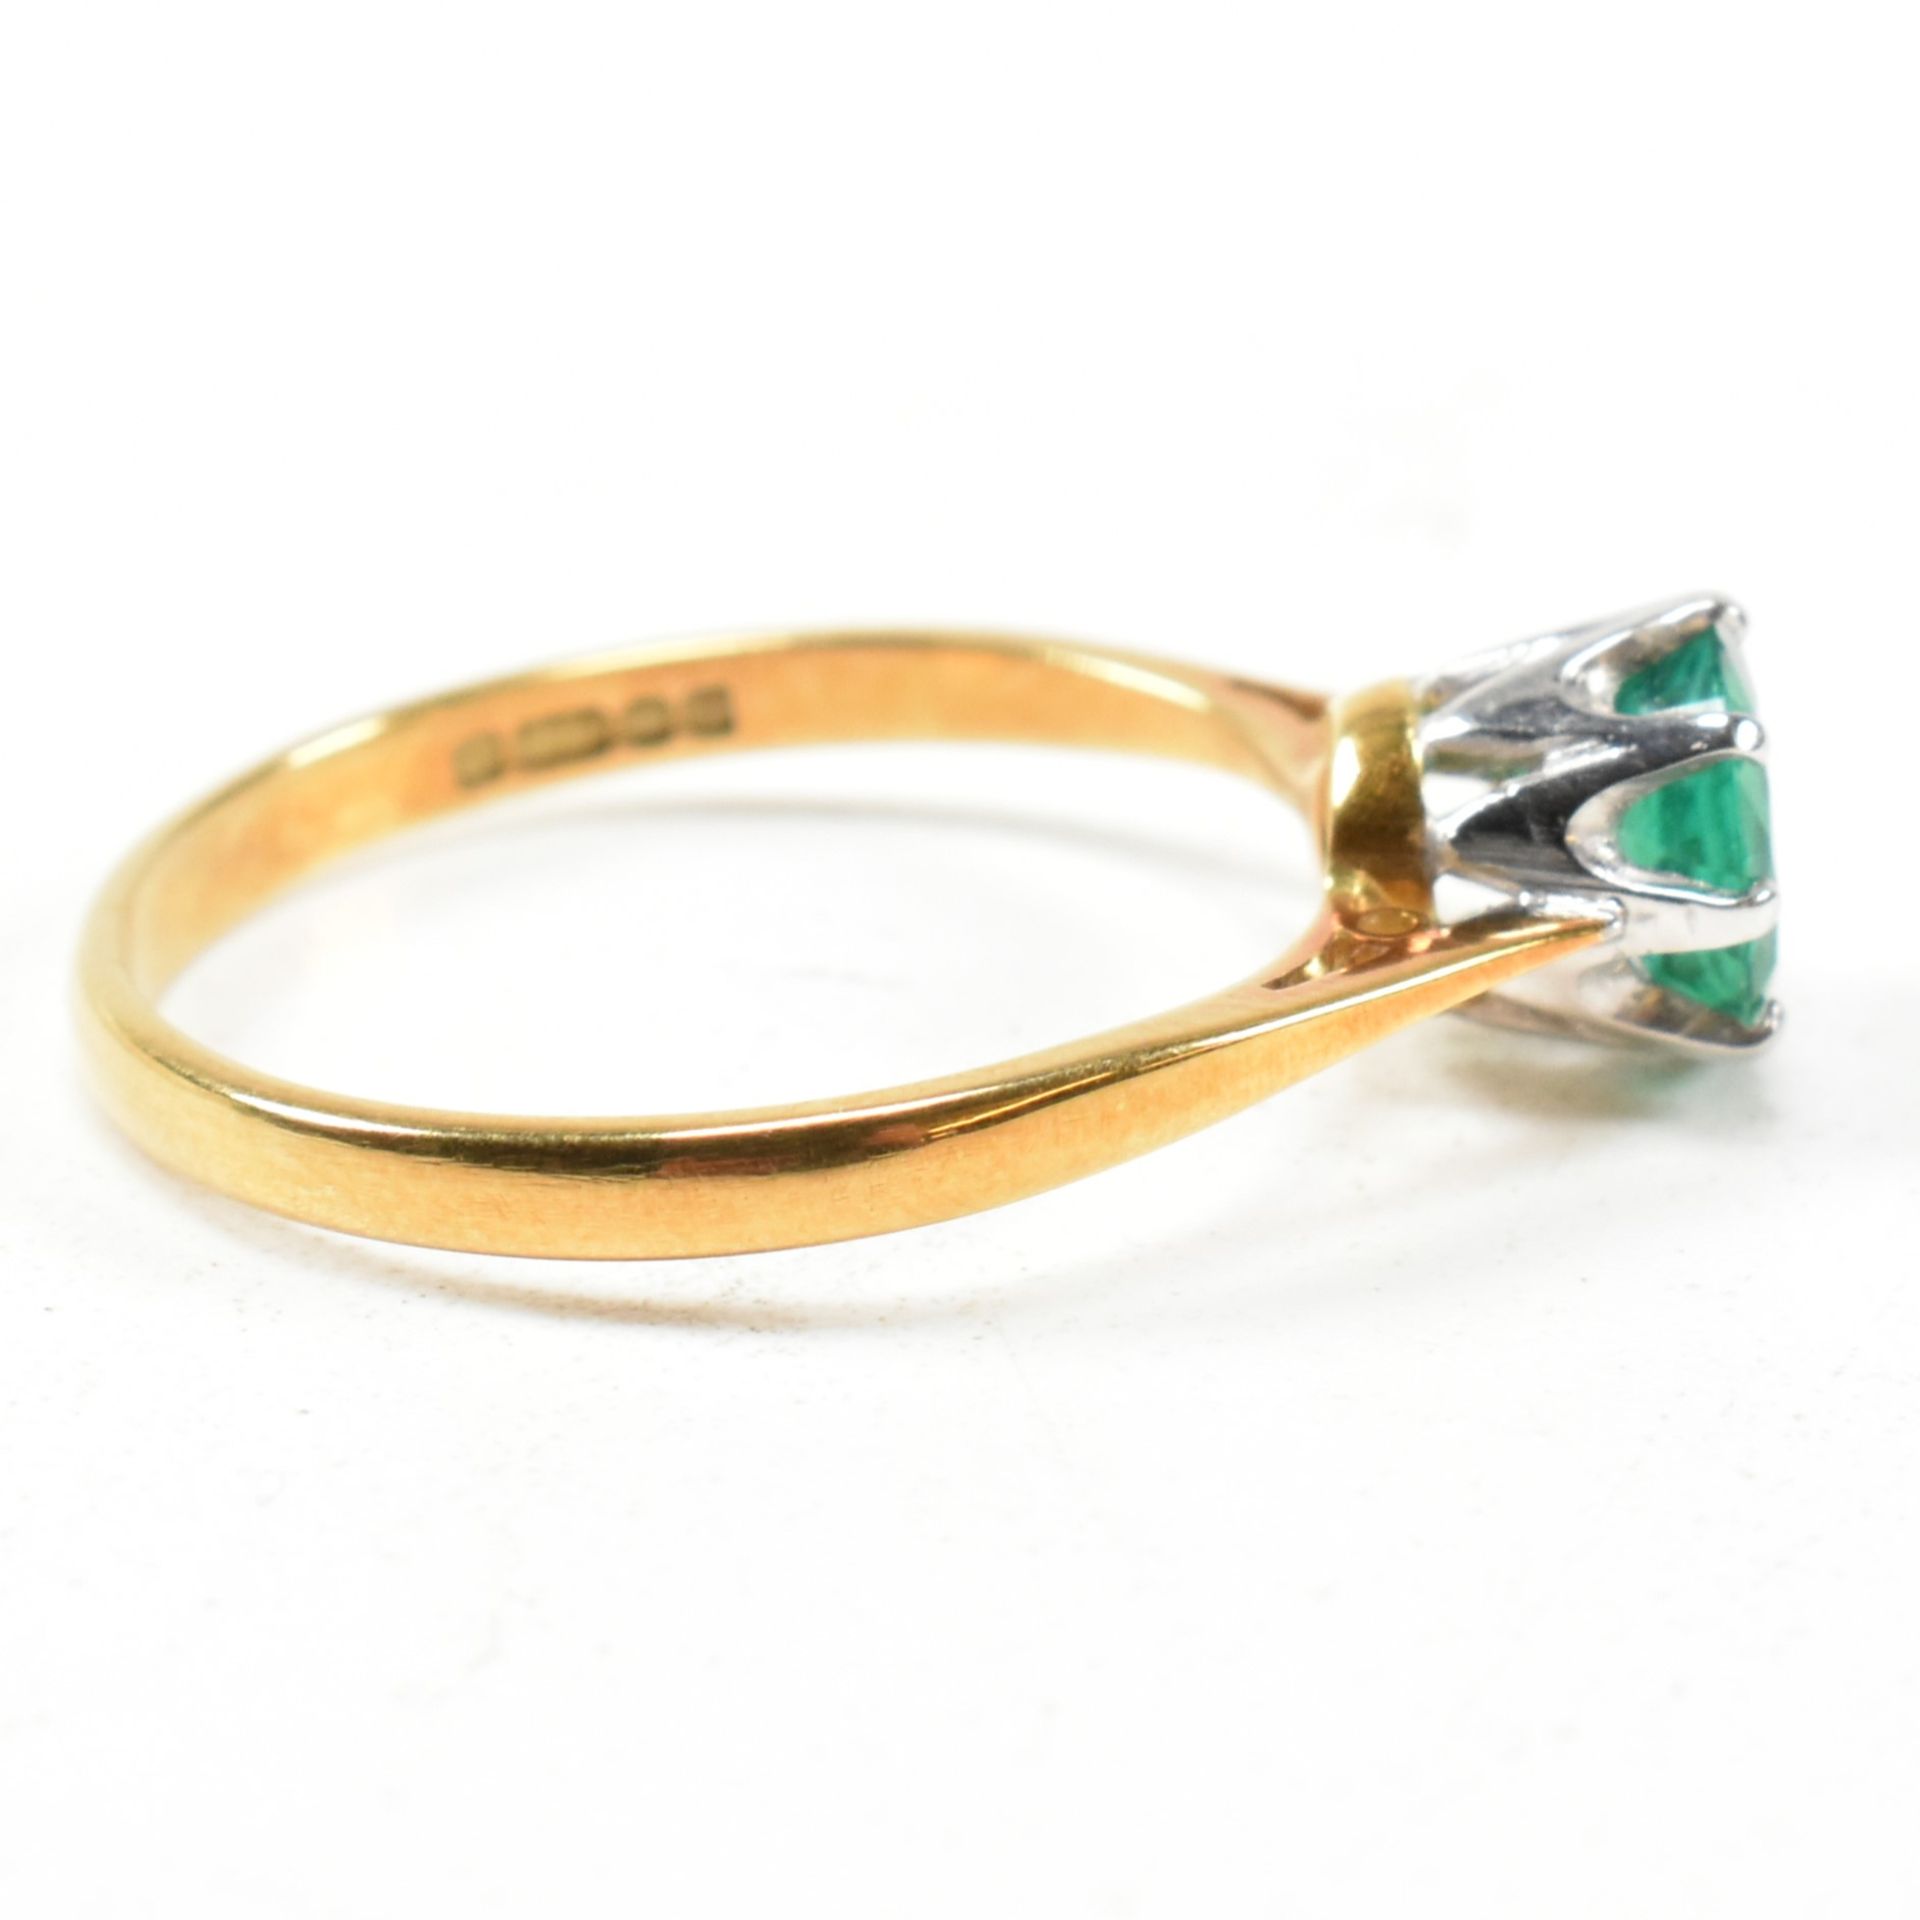 HALLMARKED 18CT GOLD & EMERALD SOLITAIRE RING - Image 4 of 10